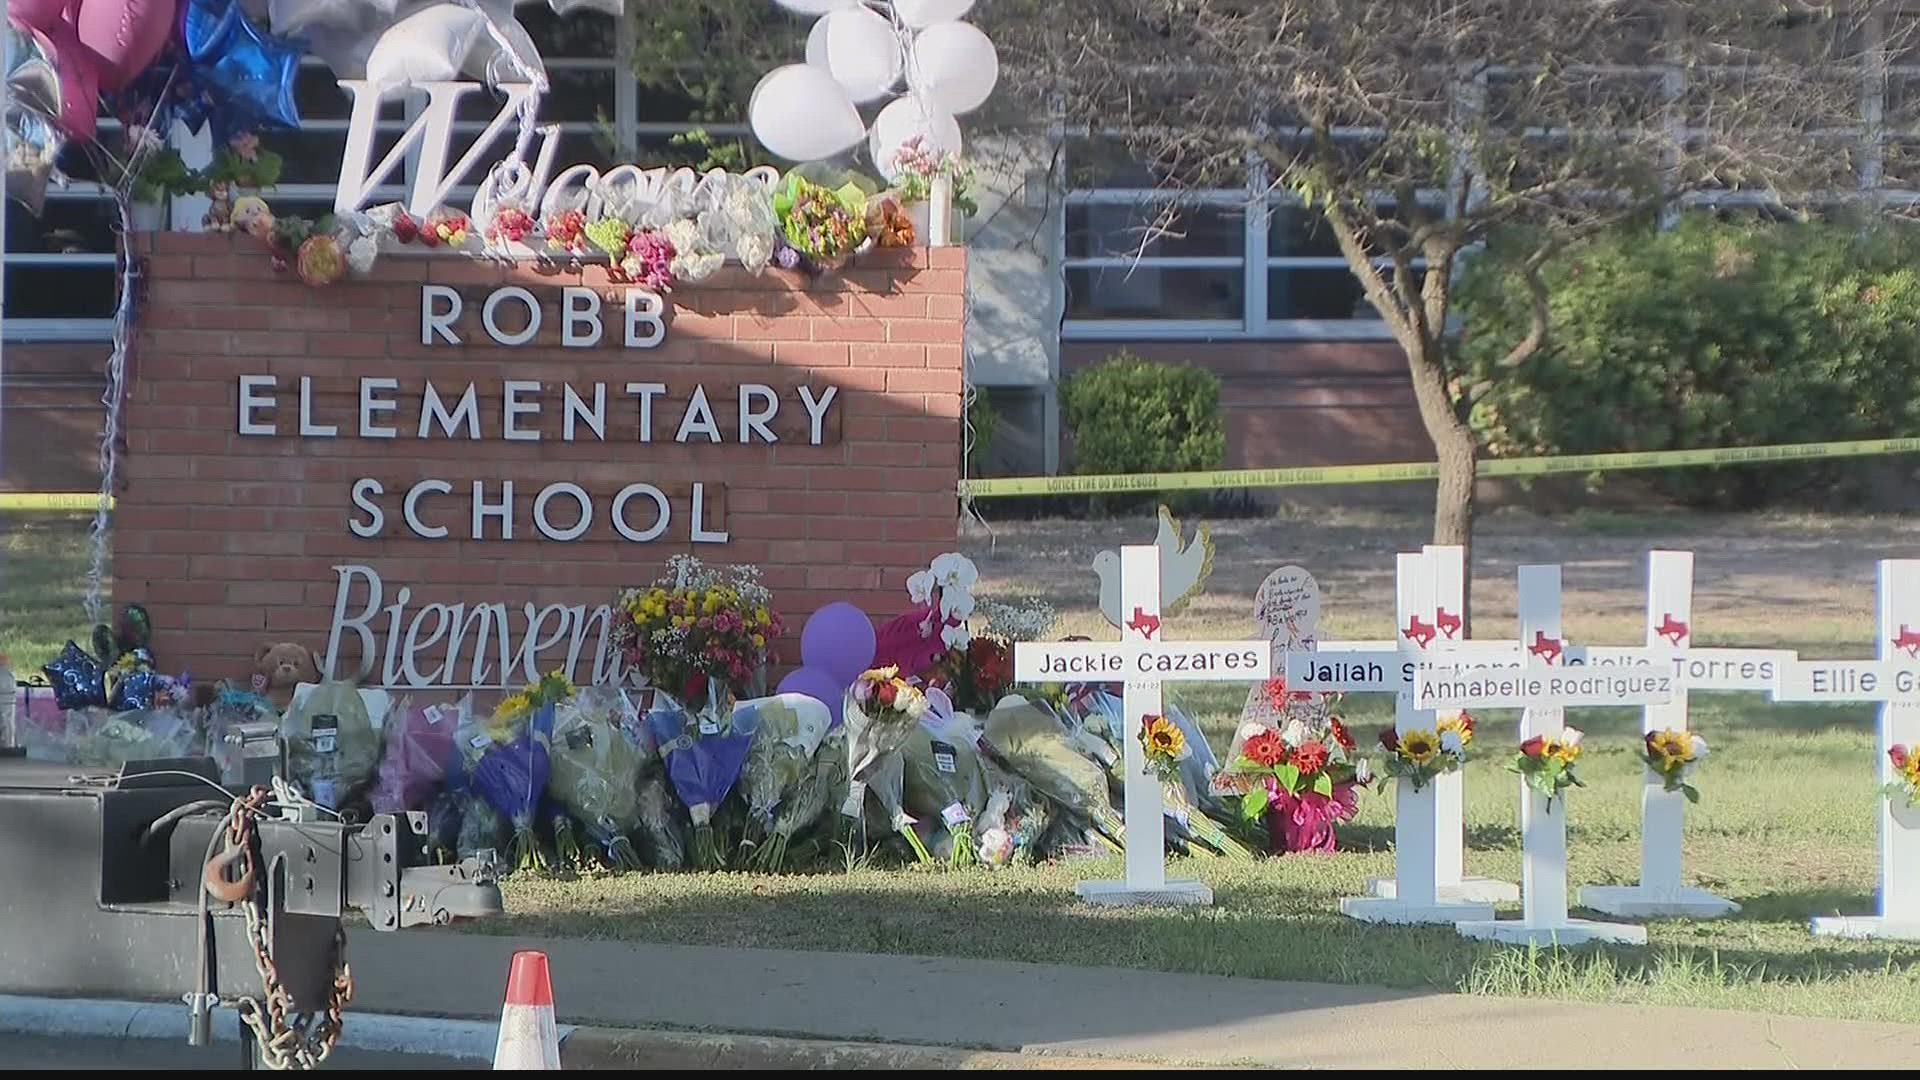 Authorities said once inside the school, the shooter locked a classroom door and started shooting. All those who died were in that classroom.